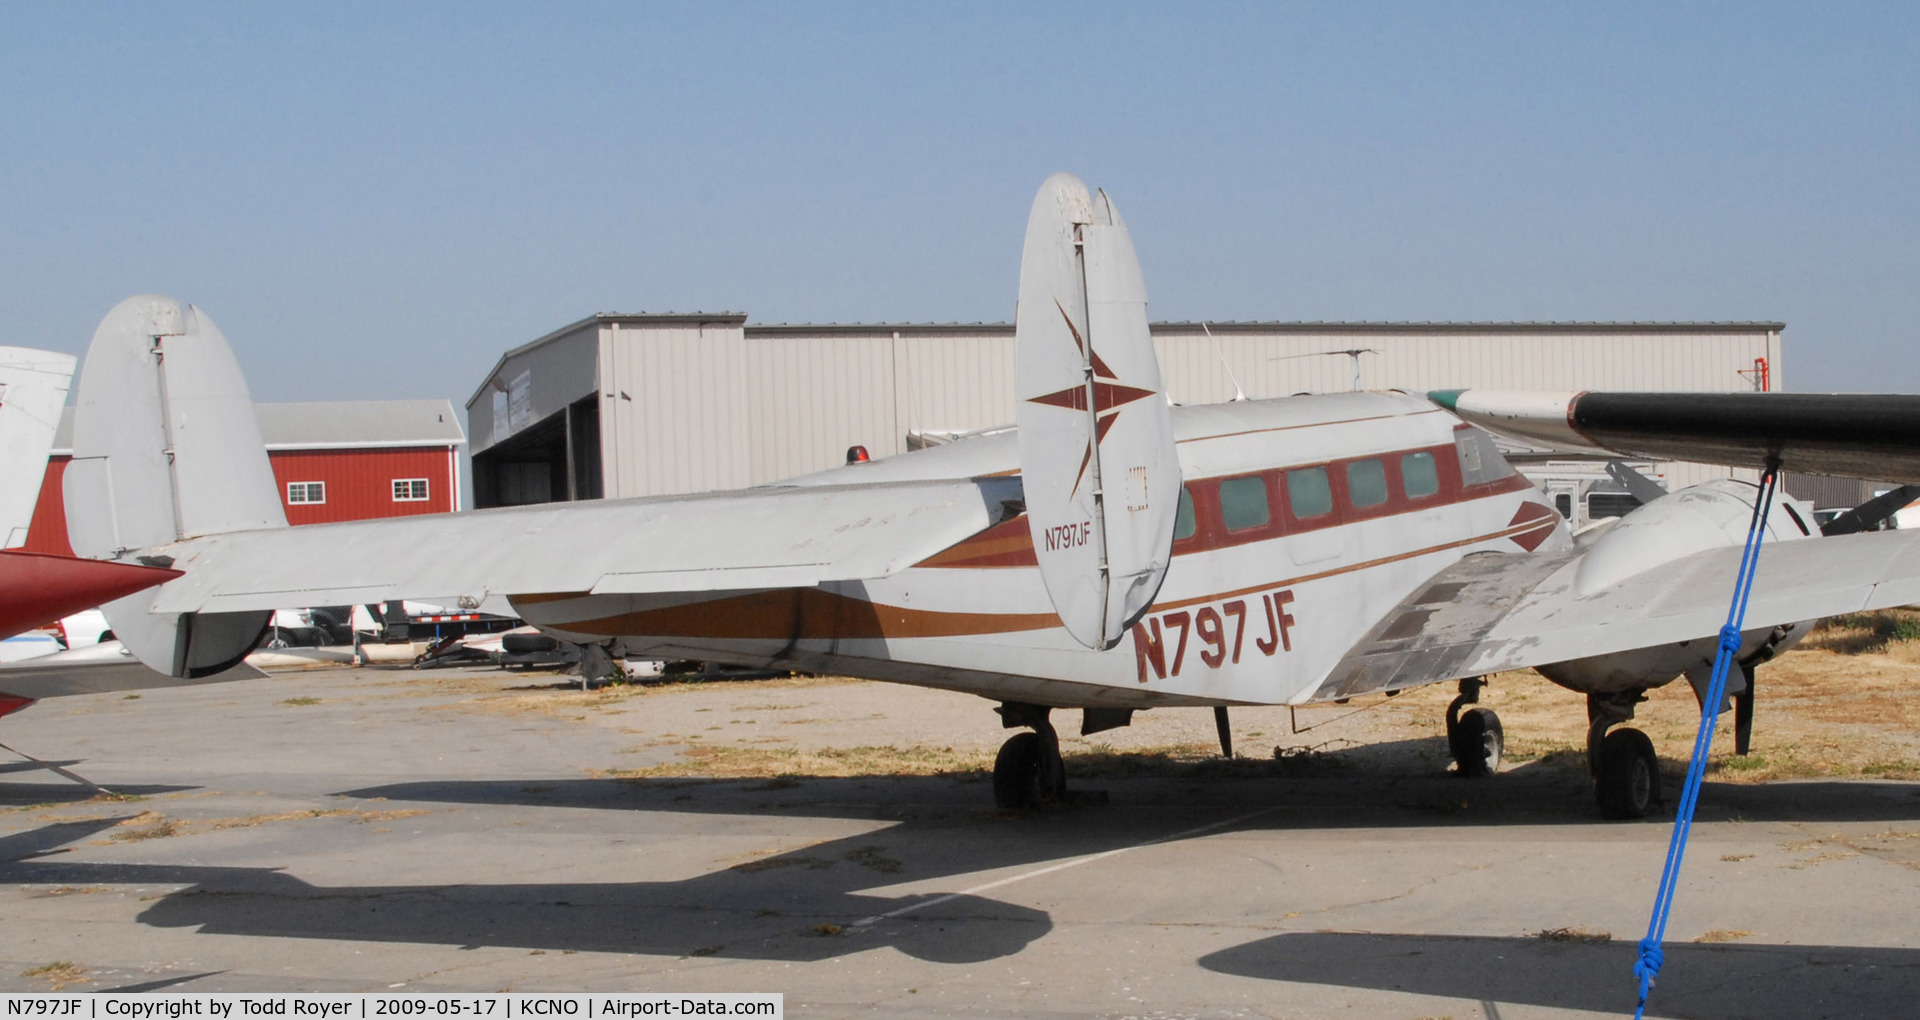 N797JF, 1951 Beech C-45G Expeditor C/N AF-287, At chino in 2009